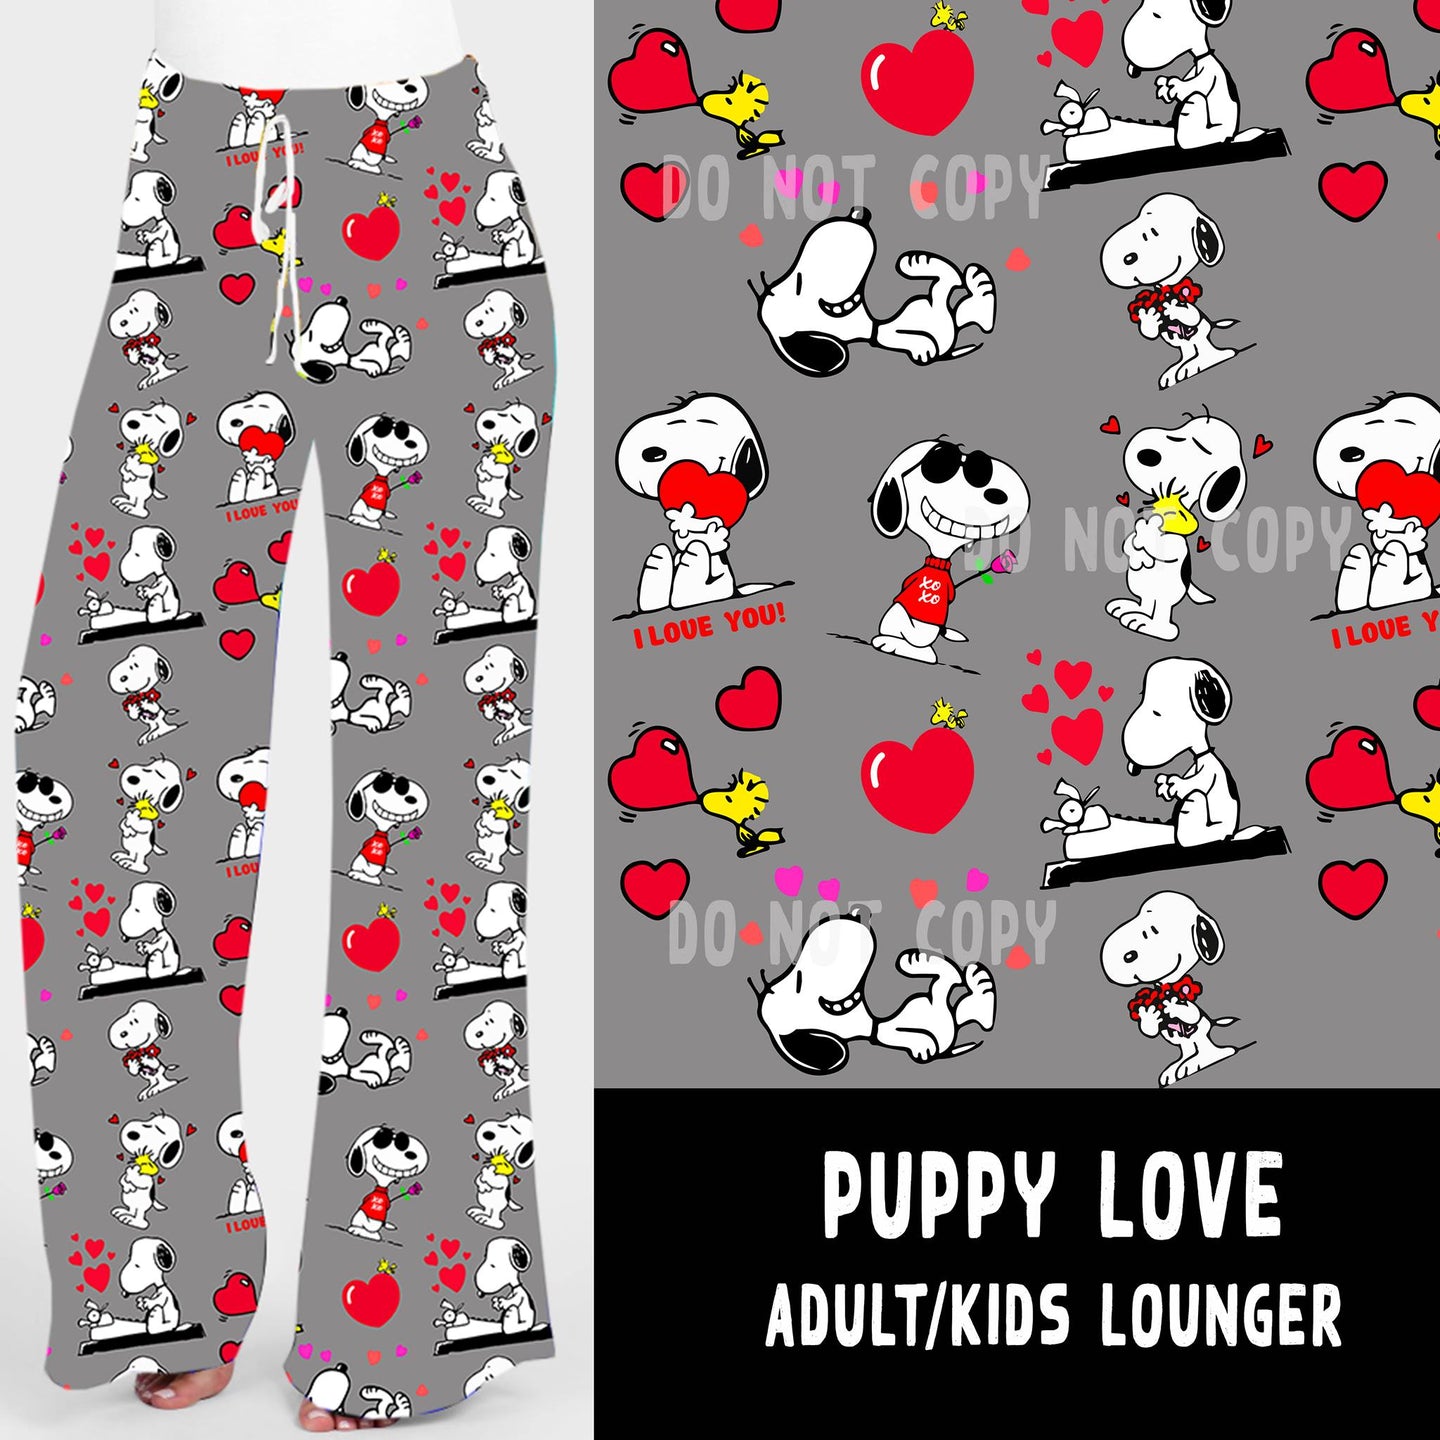 LUCKY IN LOVE-PUPPY LOVE UNISEX ADULT/KIDS LOUNGER- PREORDER CLOSING 11/12